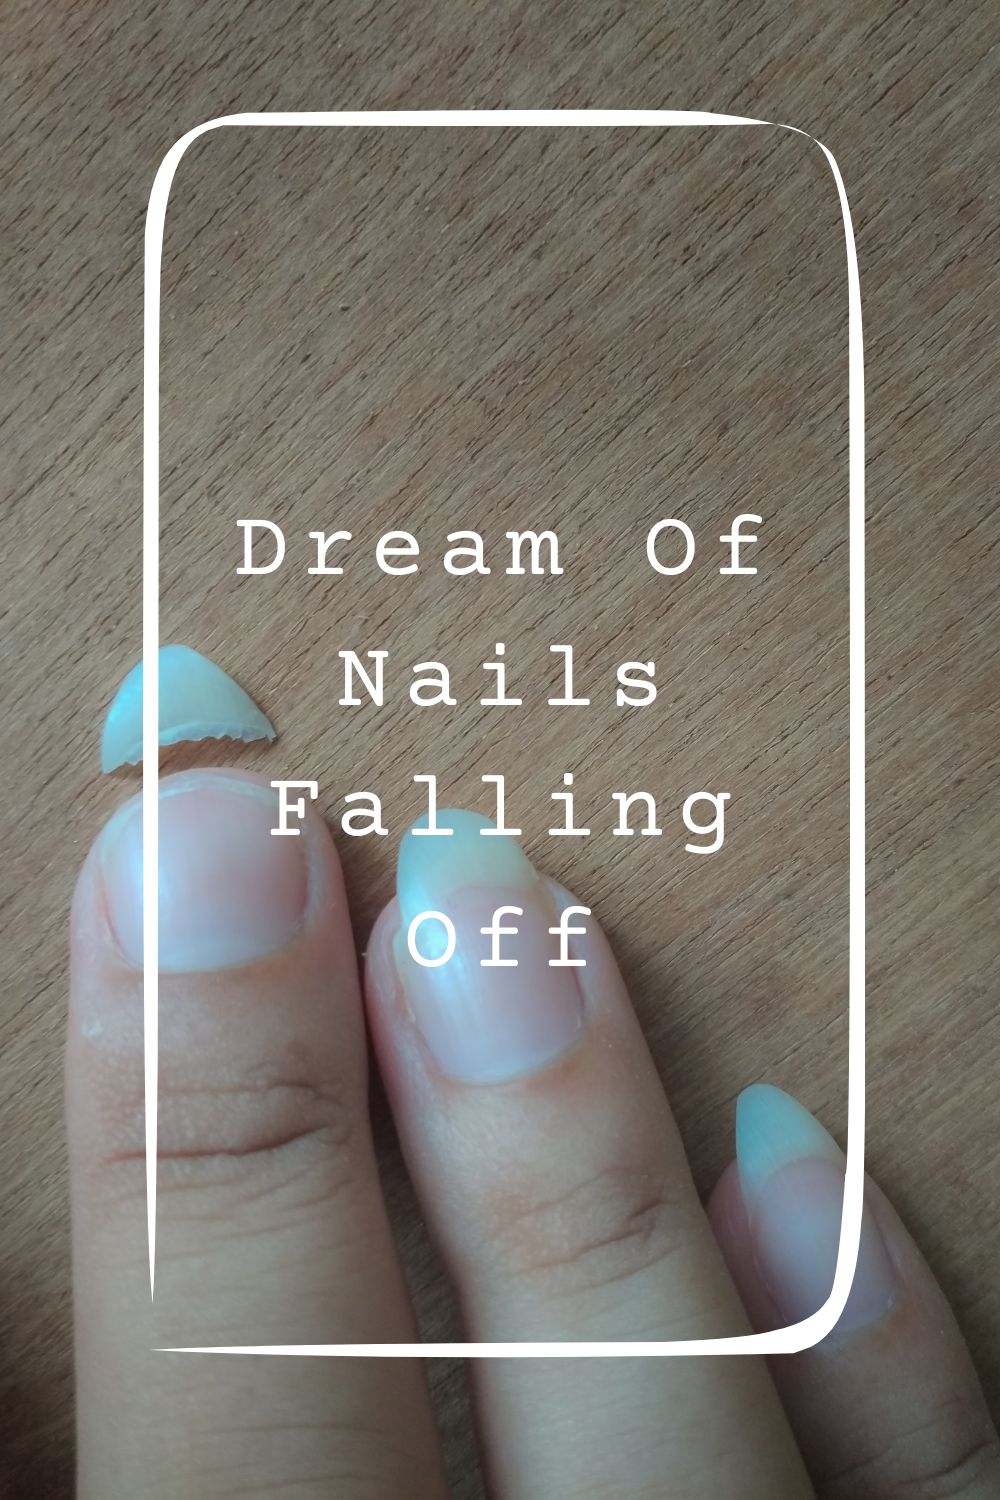 Dream Of Nails Falling Off Meanings 1